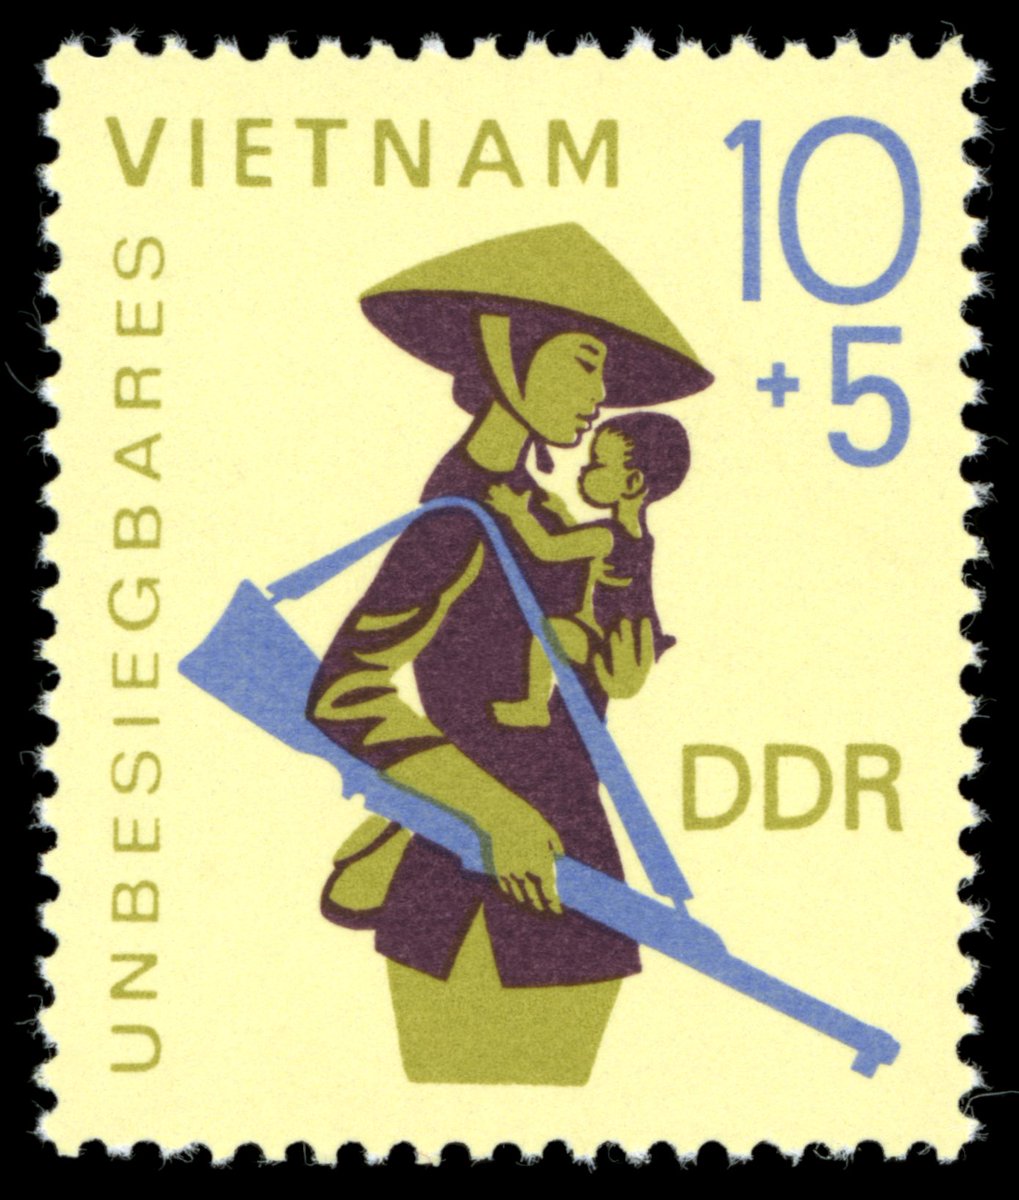 8 May 1967: stamps issued in the GDR depicting 'invincible Vietnam'